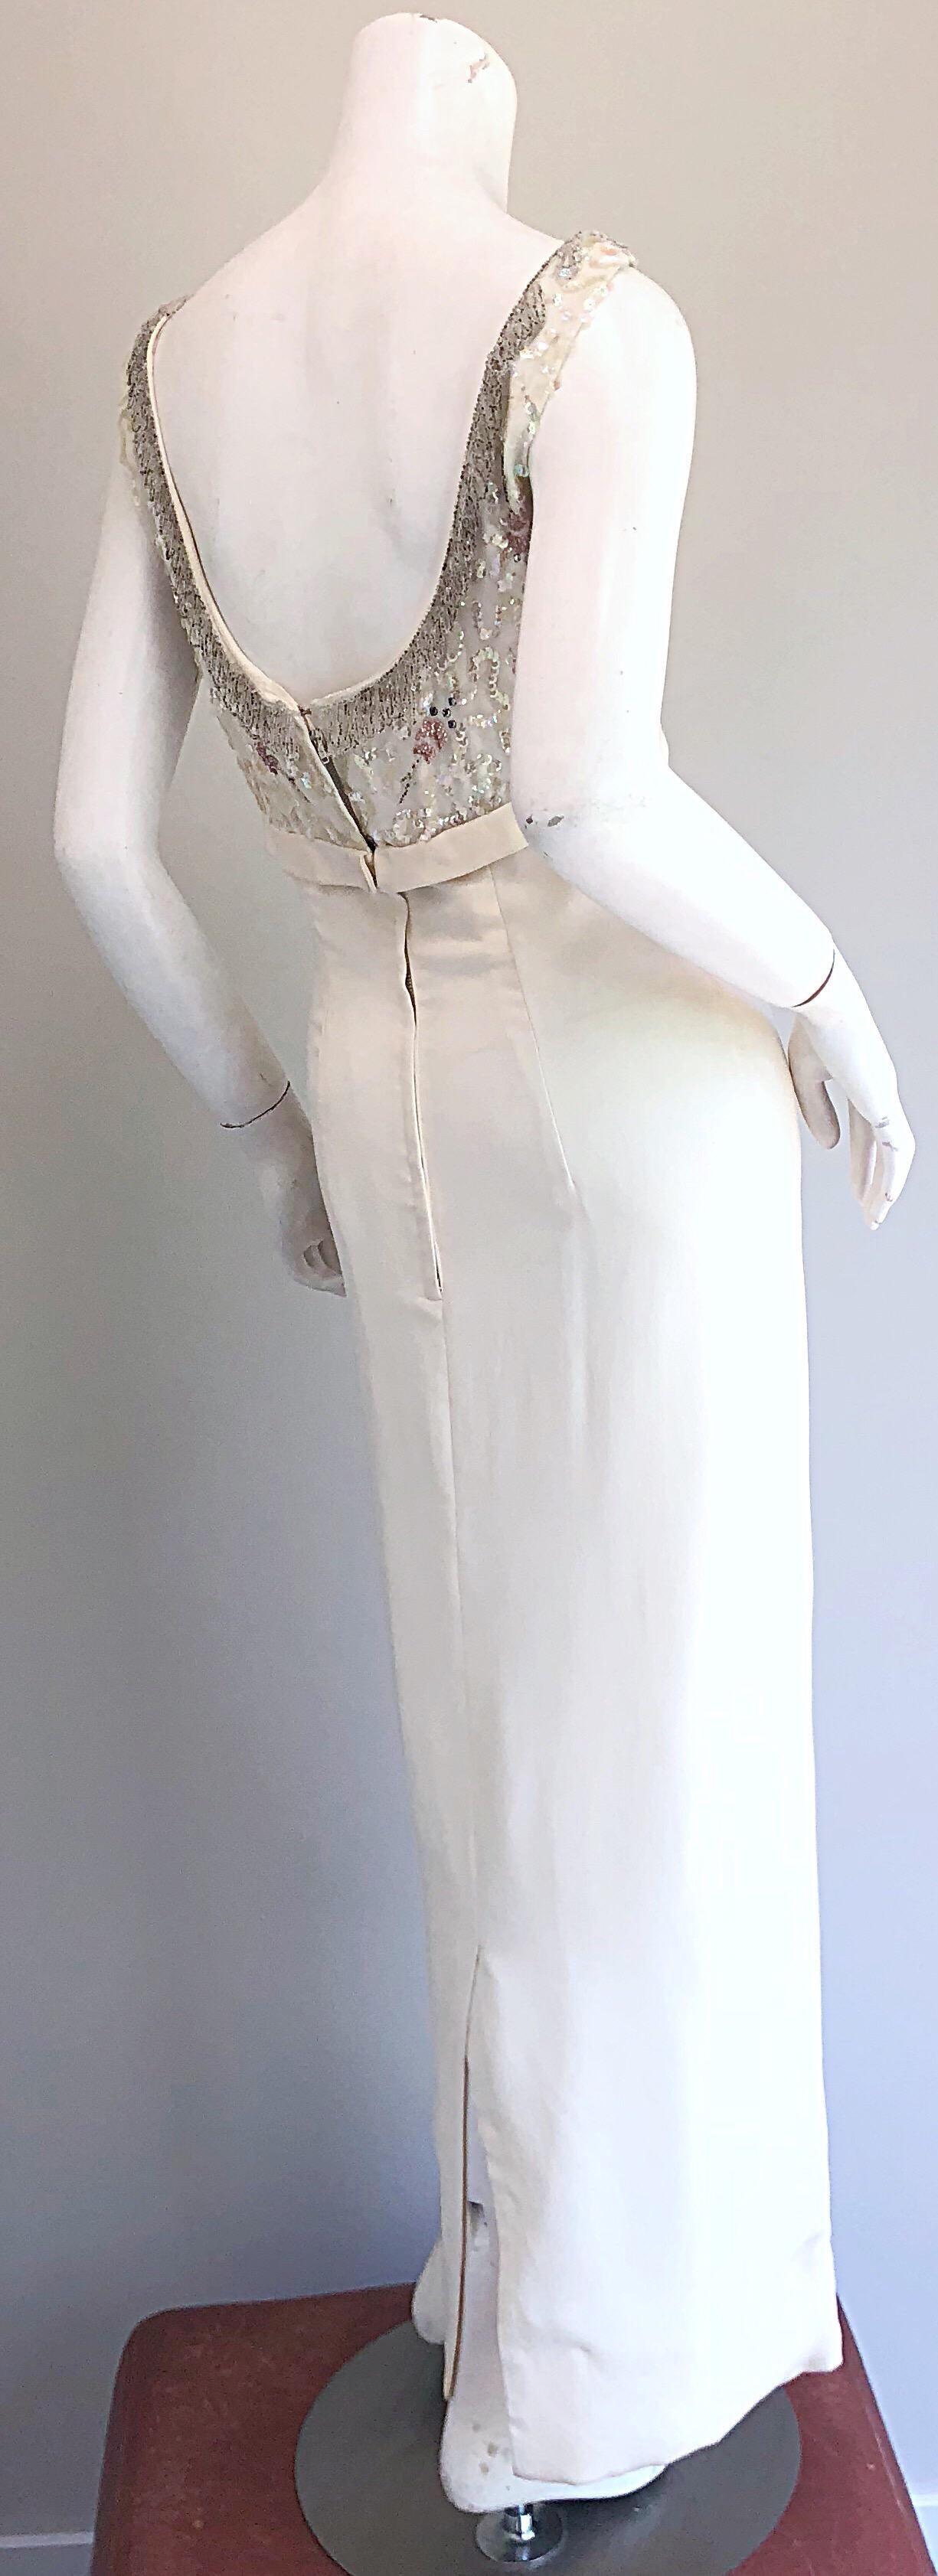 Gorgeous 1960s White Sequin Beaded Vintage Crepe 60s Evening Gown Dress 5